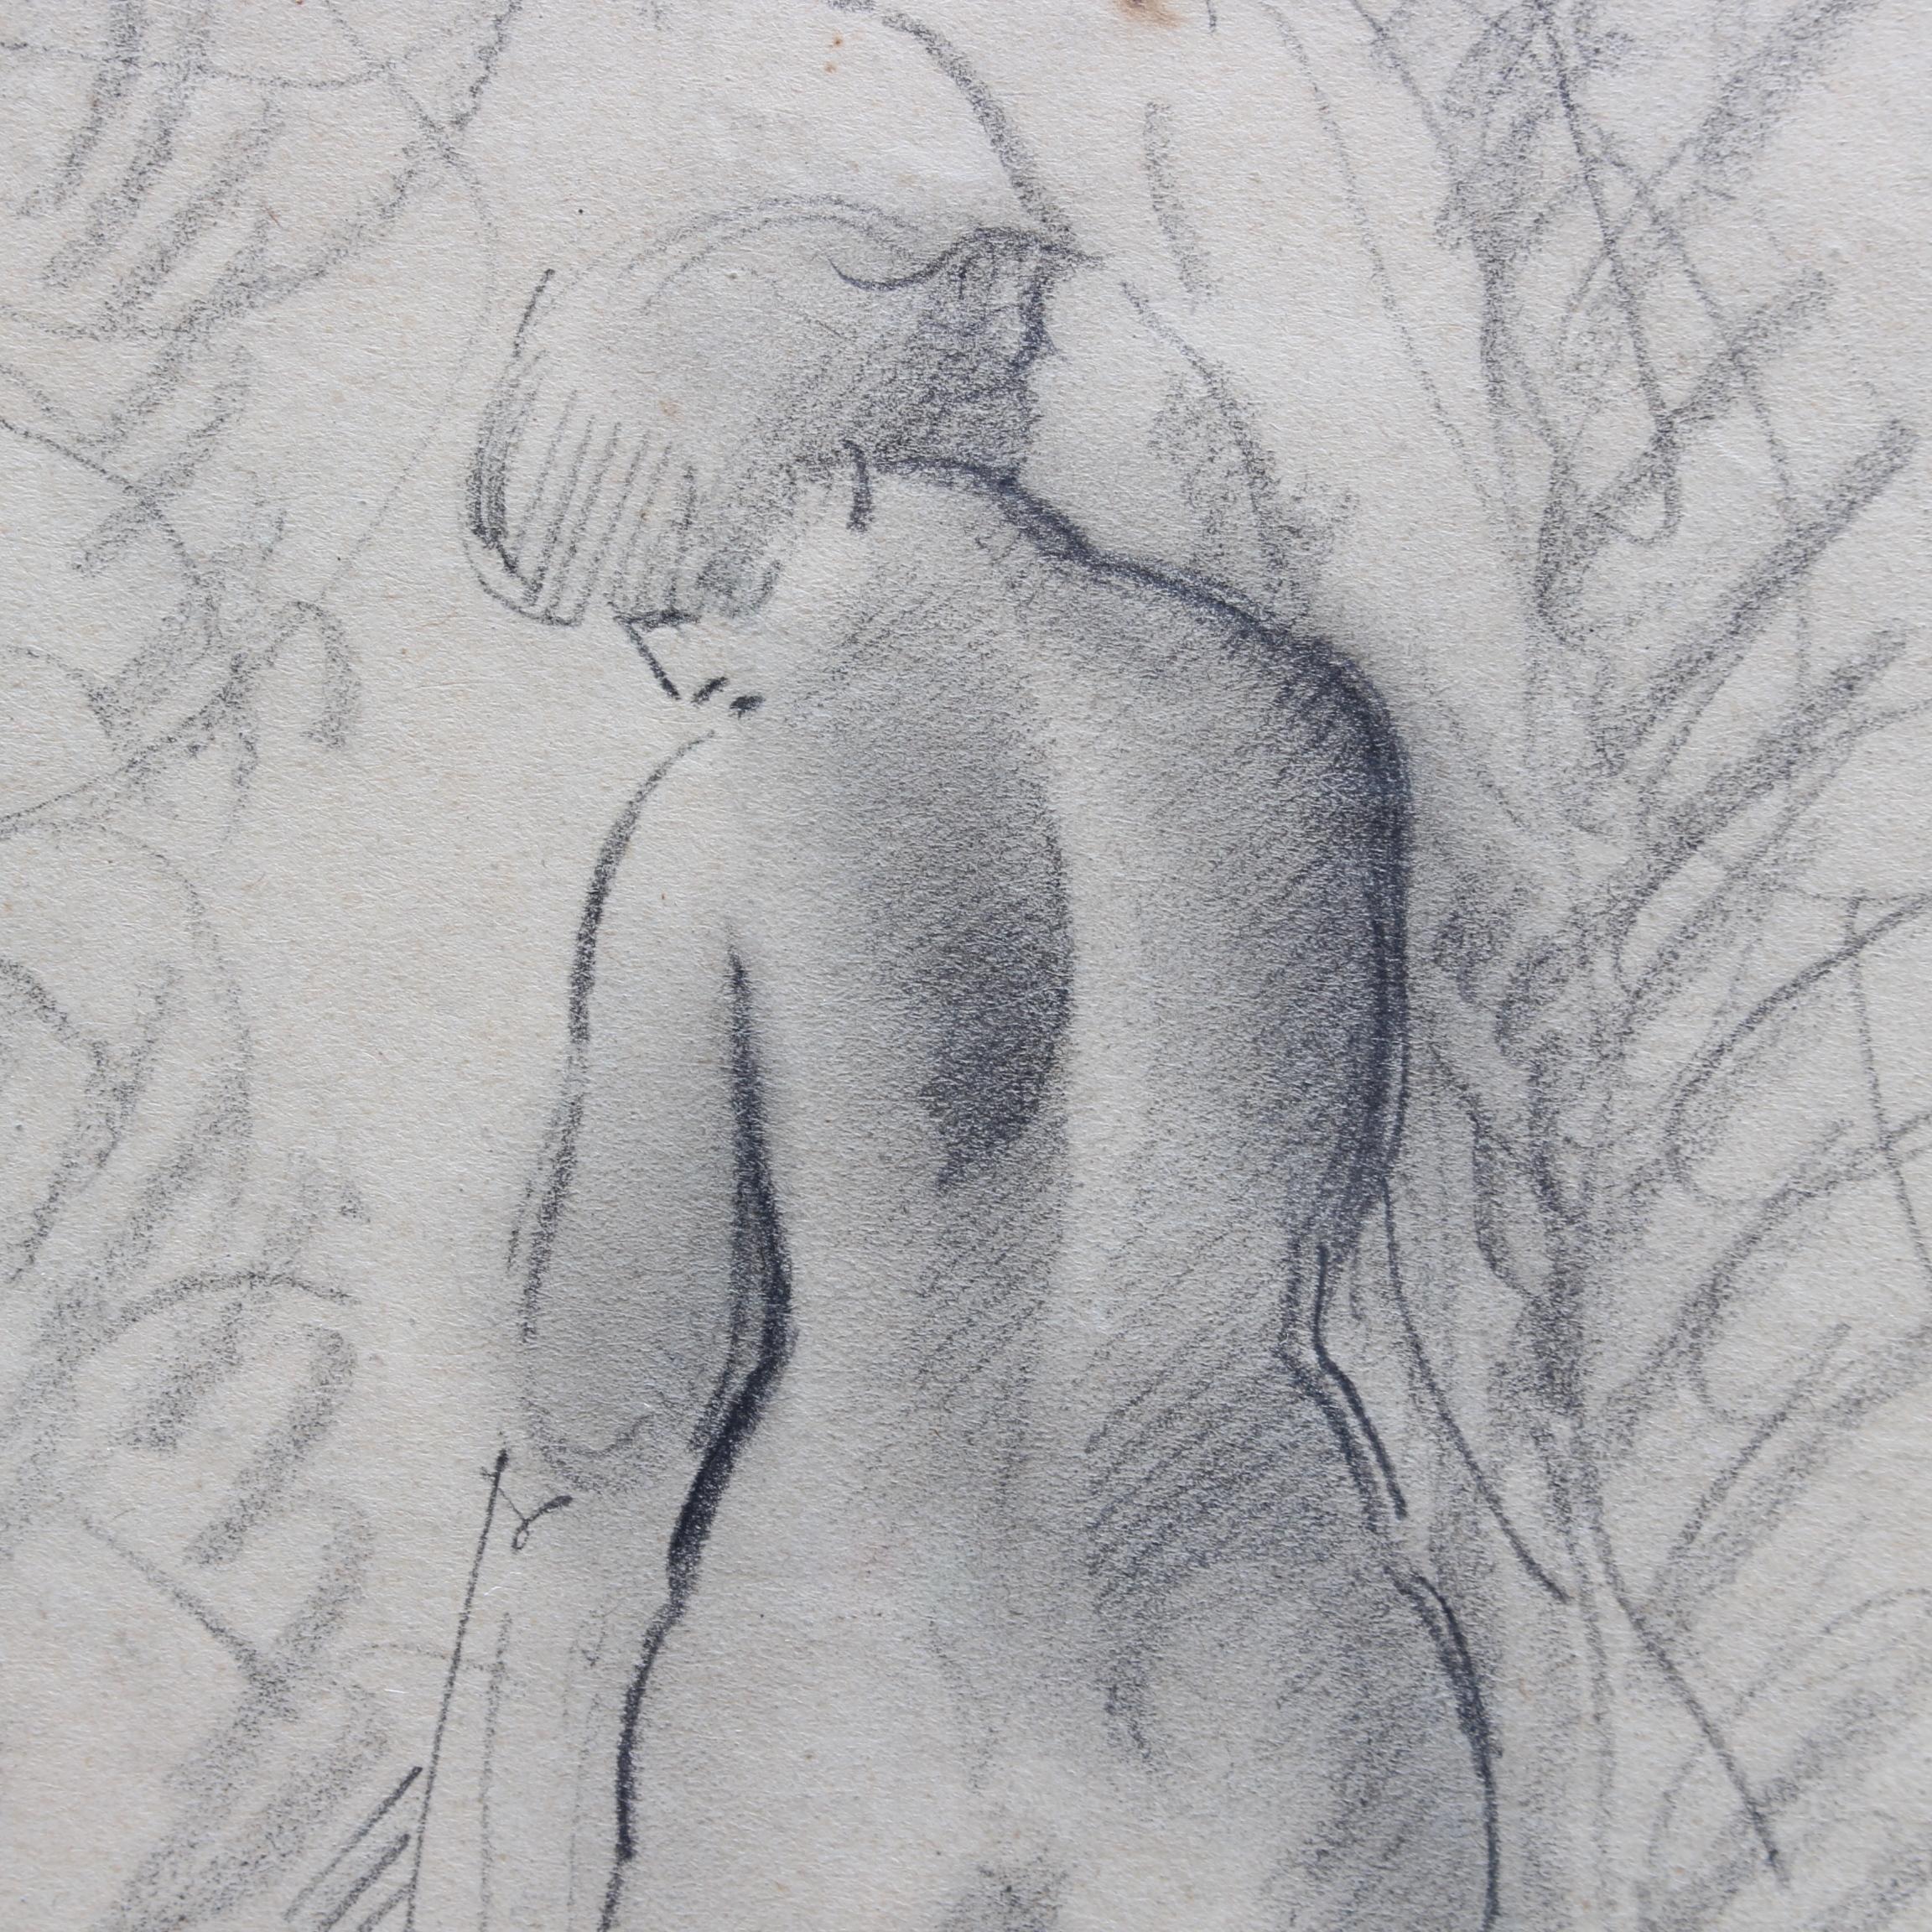 'Nude Woman After Bath', pencil on fine art paper, by French artist, Guillaume Dulac (circa 1920s). An artist known for his exquisite drawings - many are sketches for his larger oil paintings or other works - this piece is compelling because its